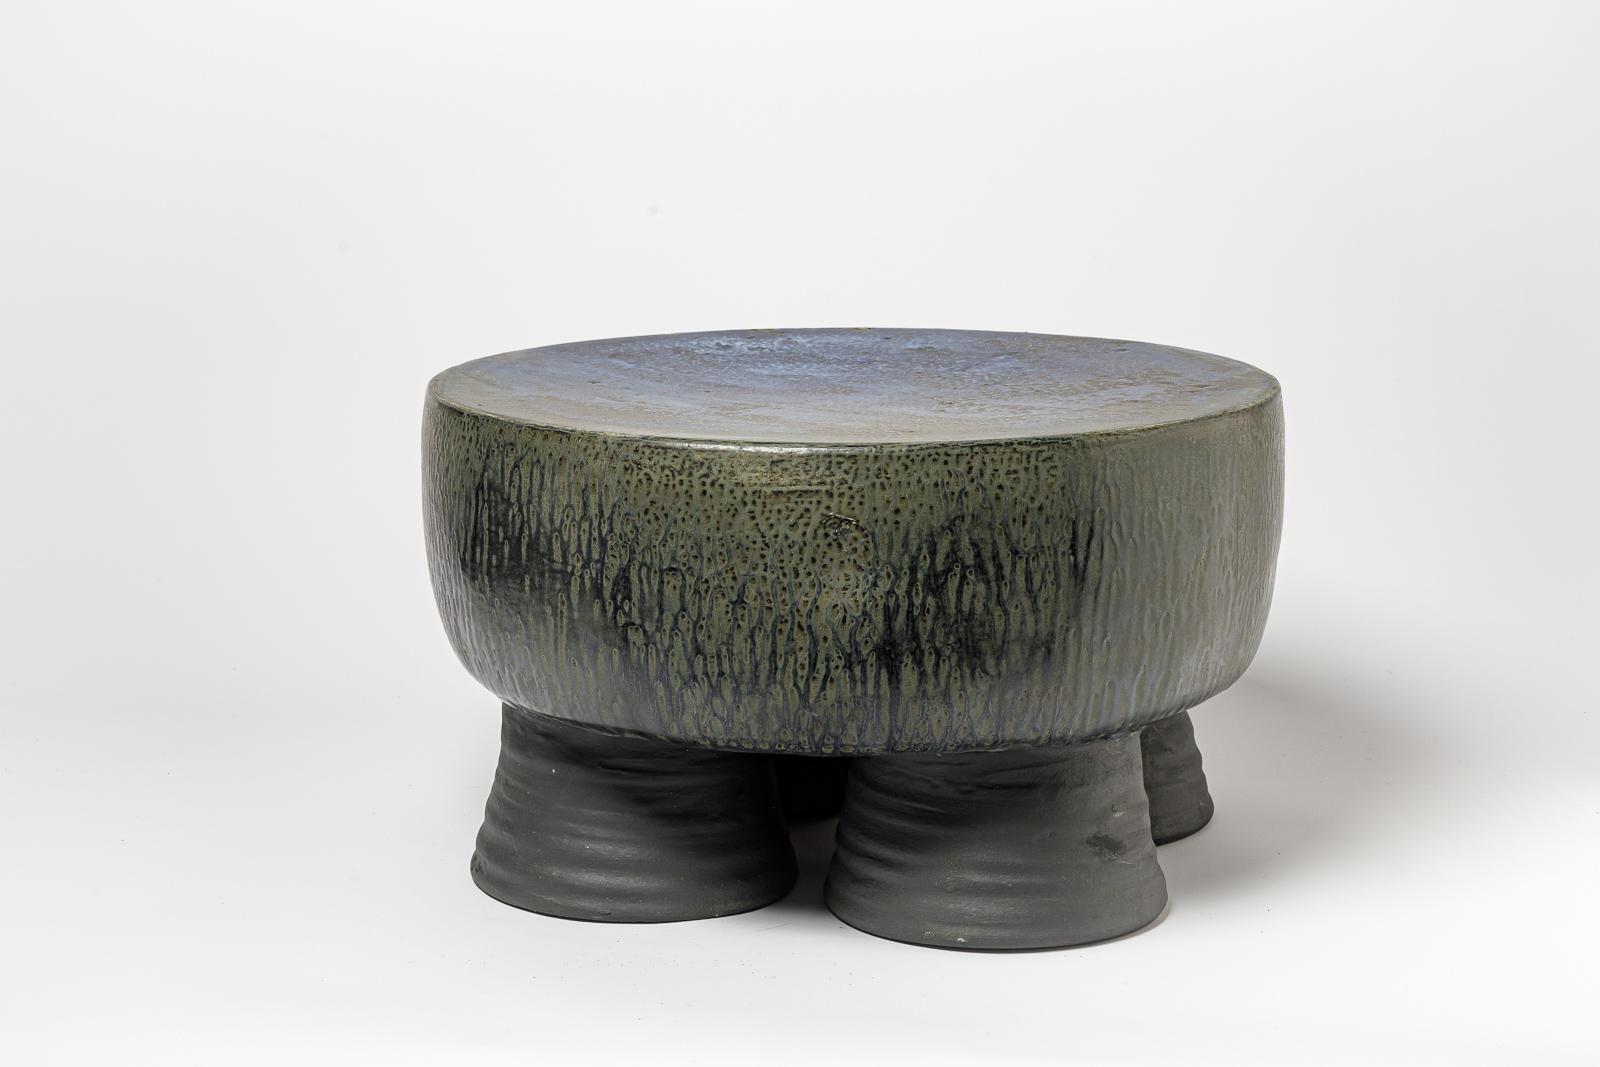 French Black/blue and grey/green glazed ceramic stool or coffee table by Mia Jensen.